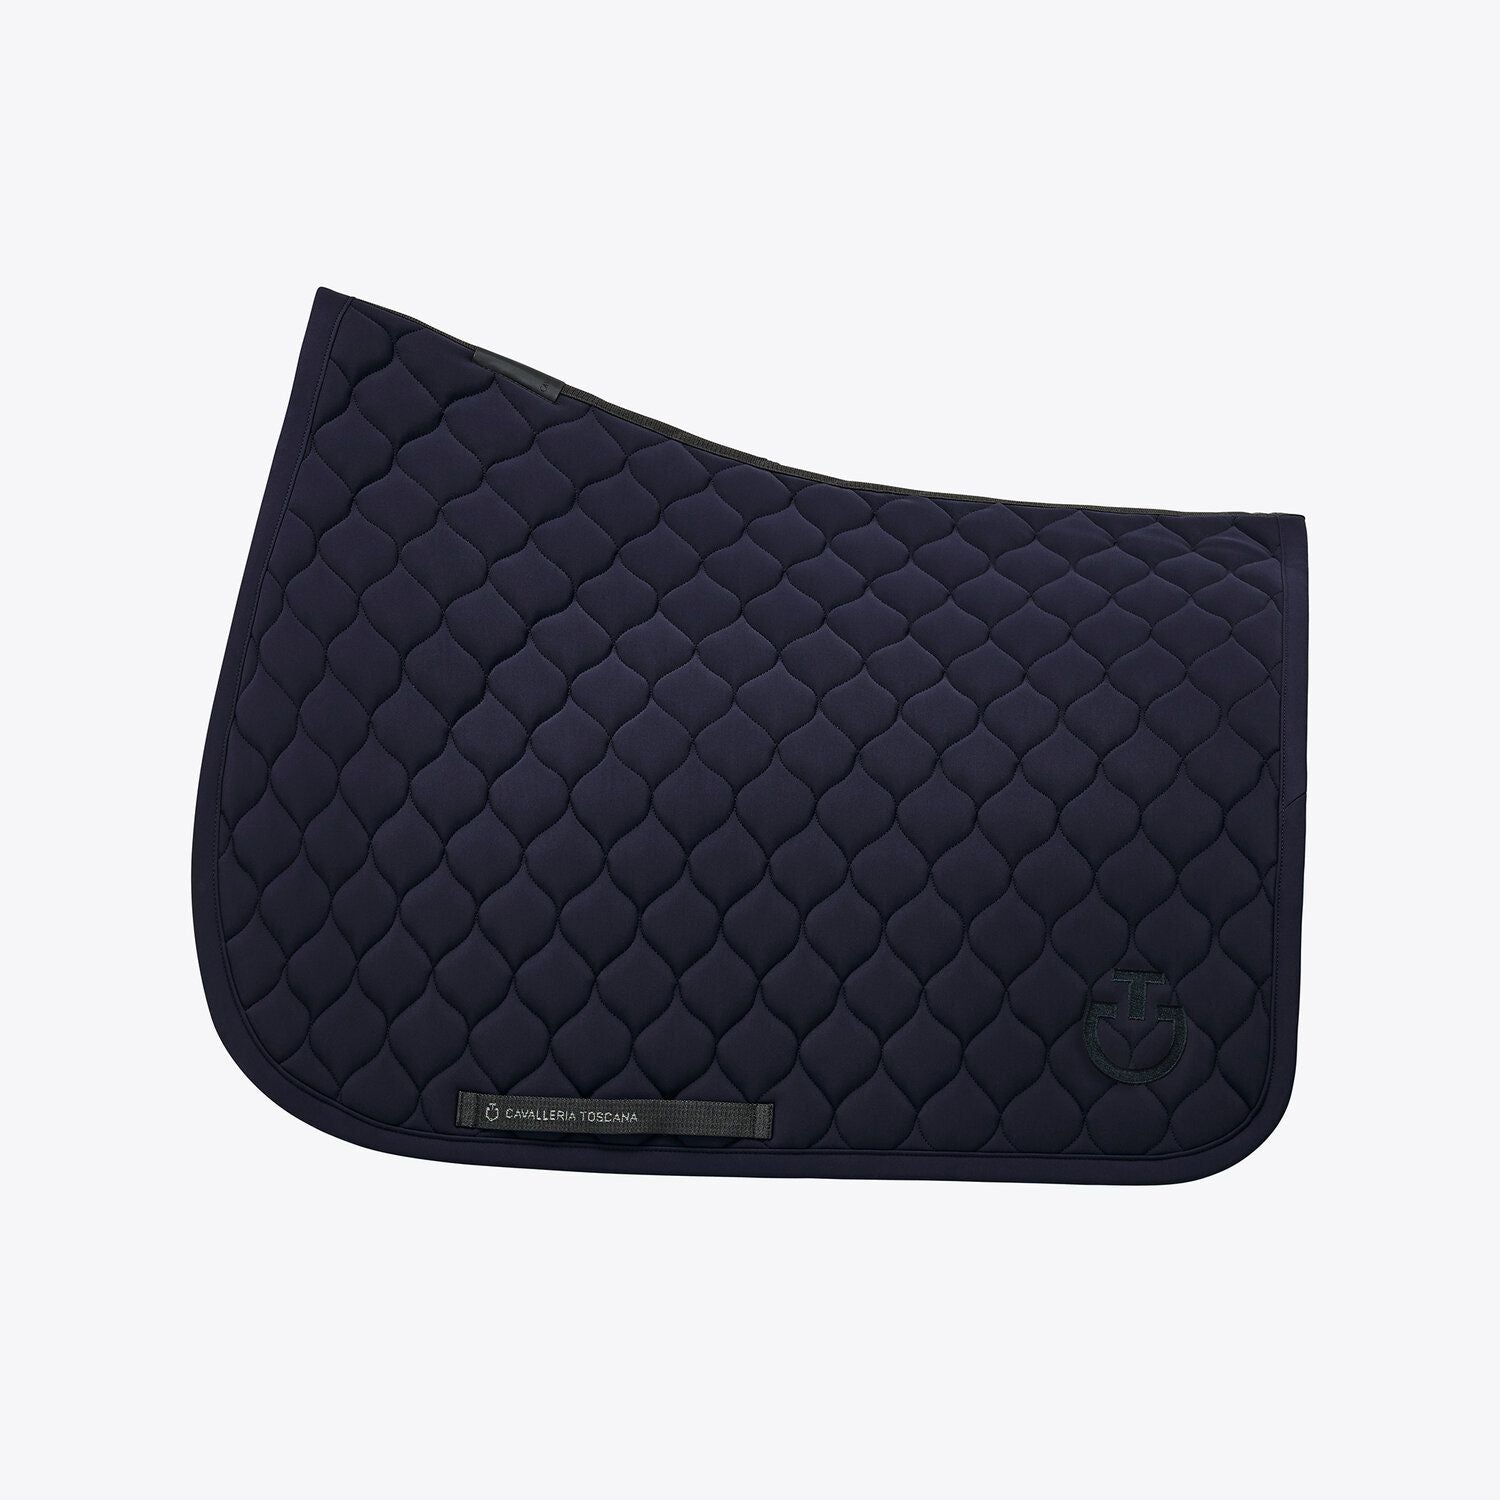 The Circular-quilted saddle pad from CT, made from breathable technical jersey. Available in Navy and finished with an embroidered black CT Logo and black edging.